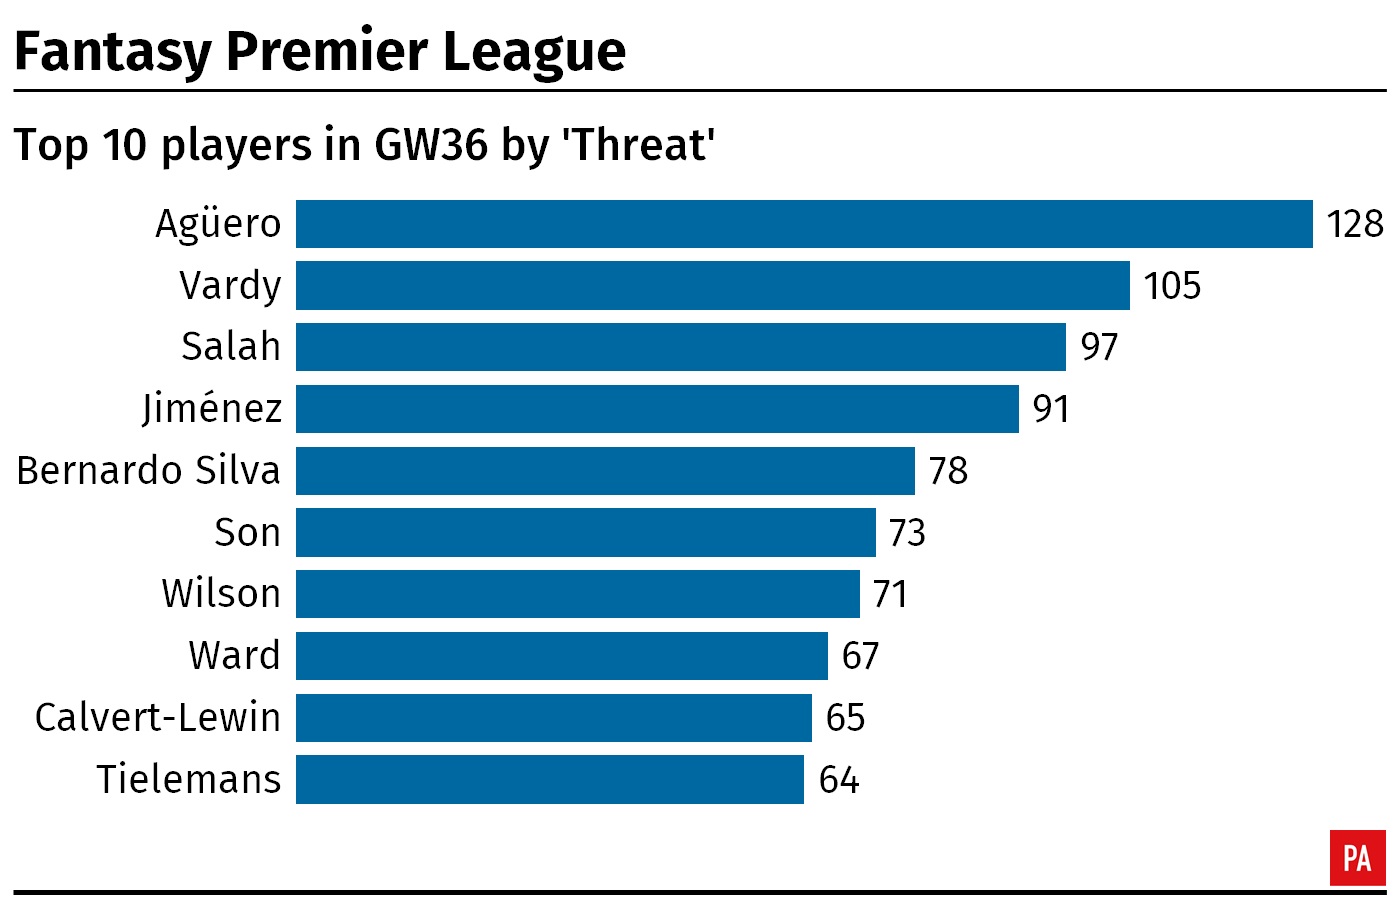 A table showing the top 10 FPL 'Threat' scores from Premier League players in gameweek 36